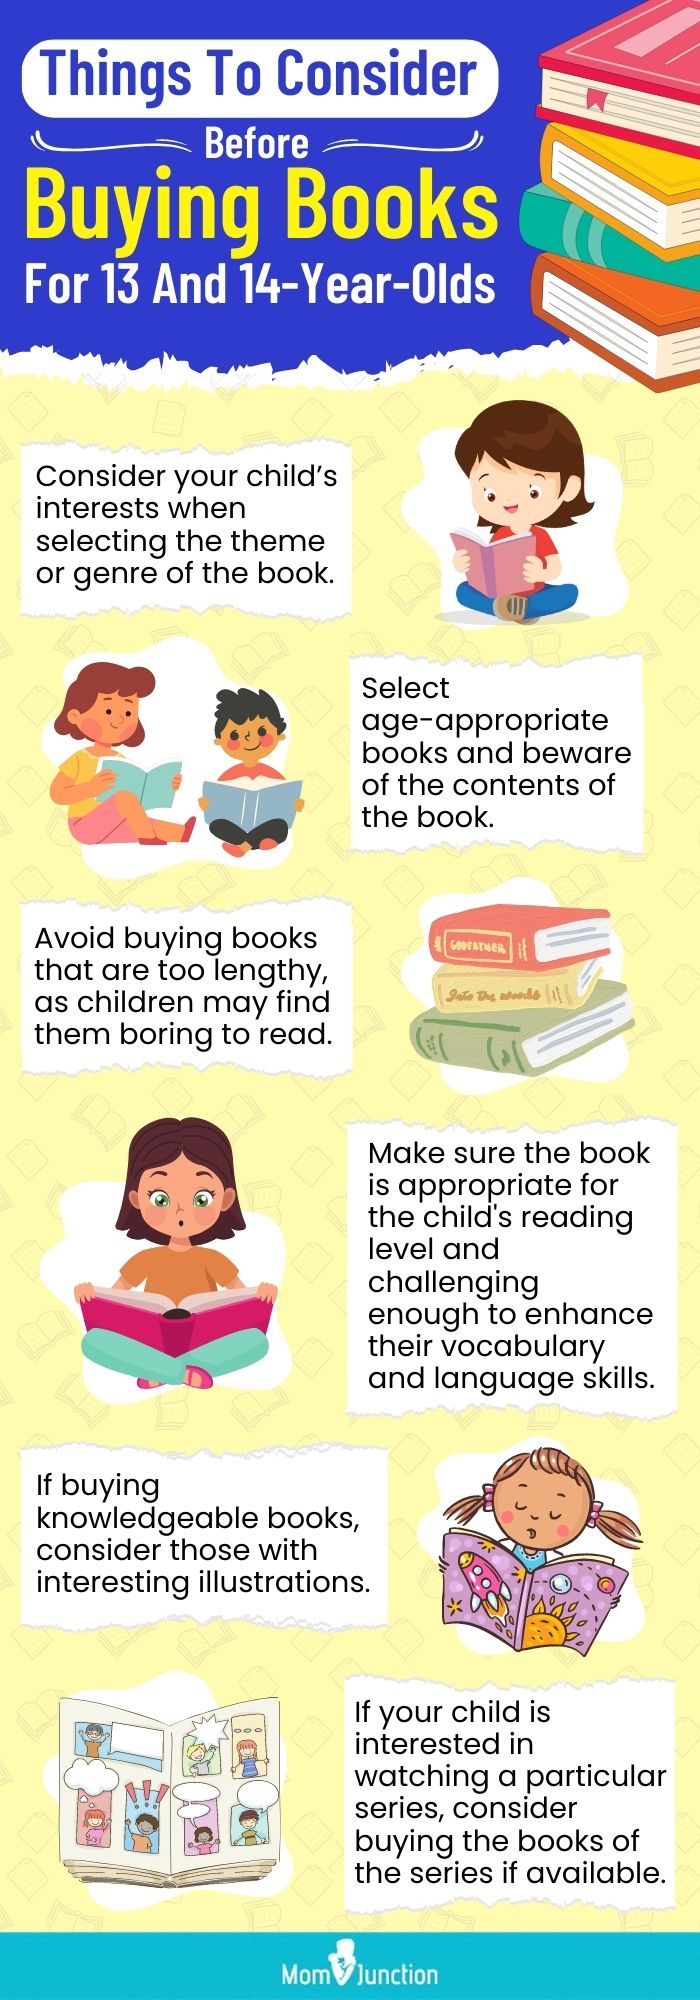 Things To Consider Before Buying Books for 13 And 14-Year-Olds (infographic)